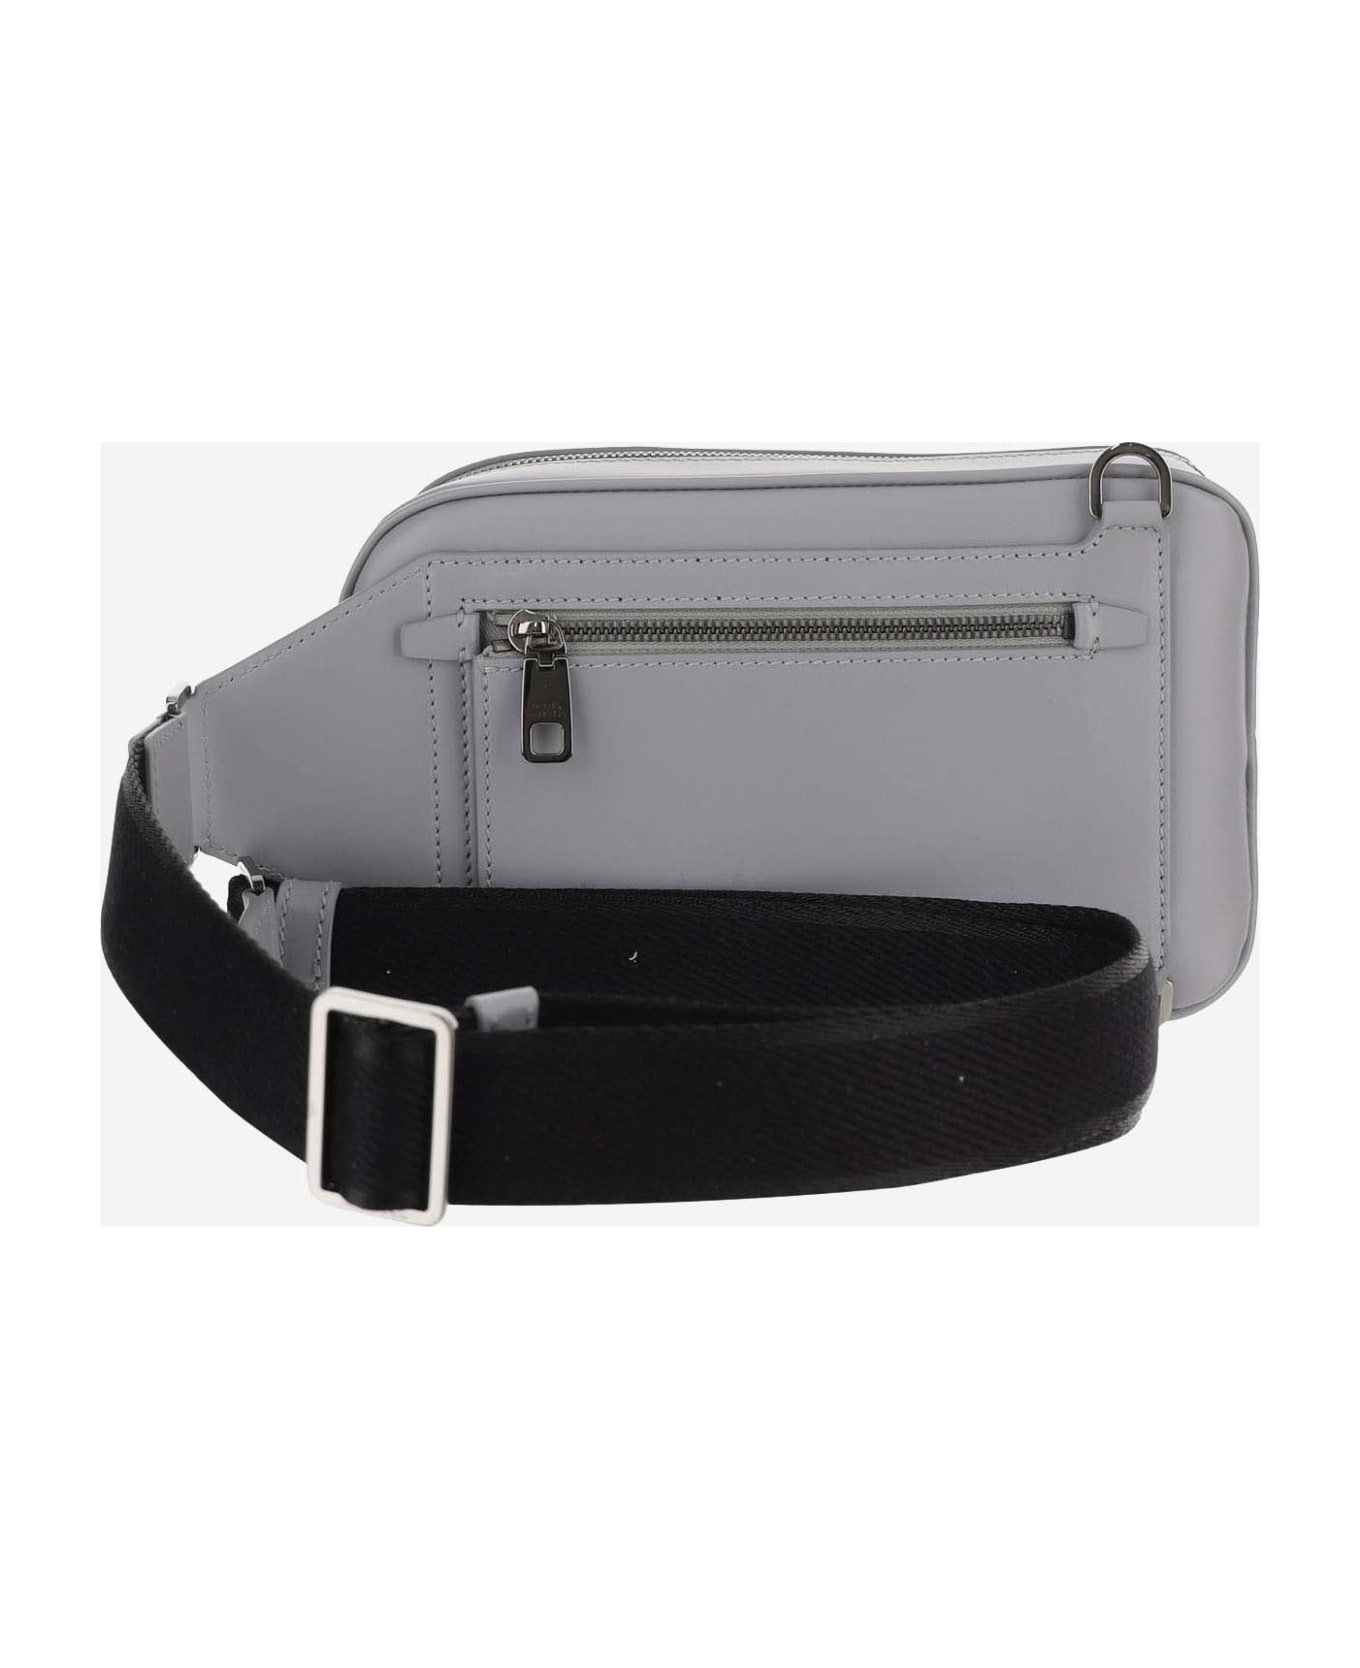 Dolce & Gabbana Calfskin Leather Fanny Pack With Embossed Logo - Grey